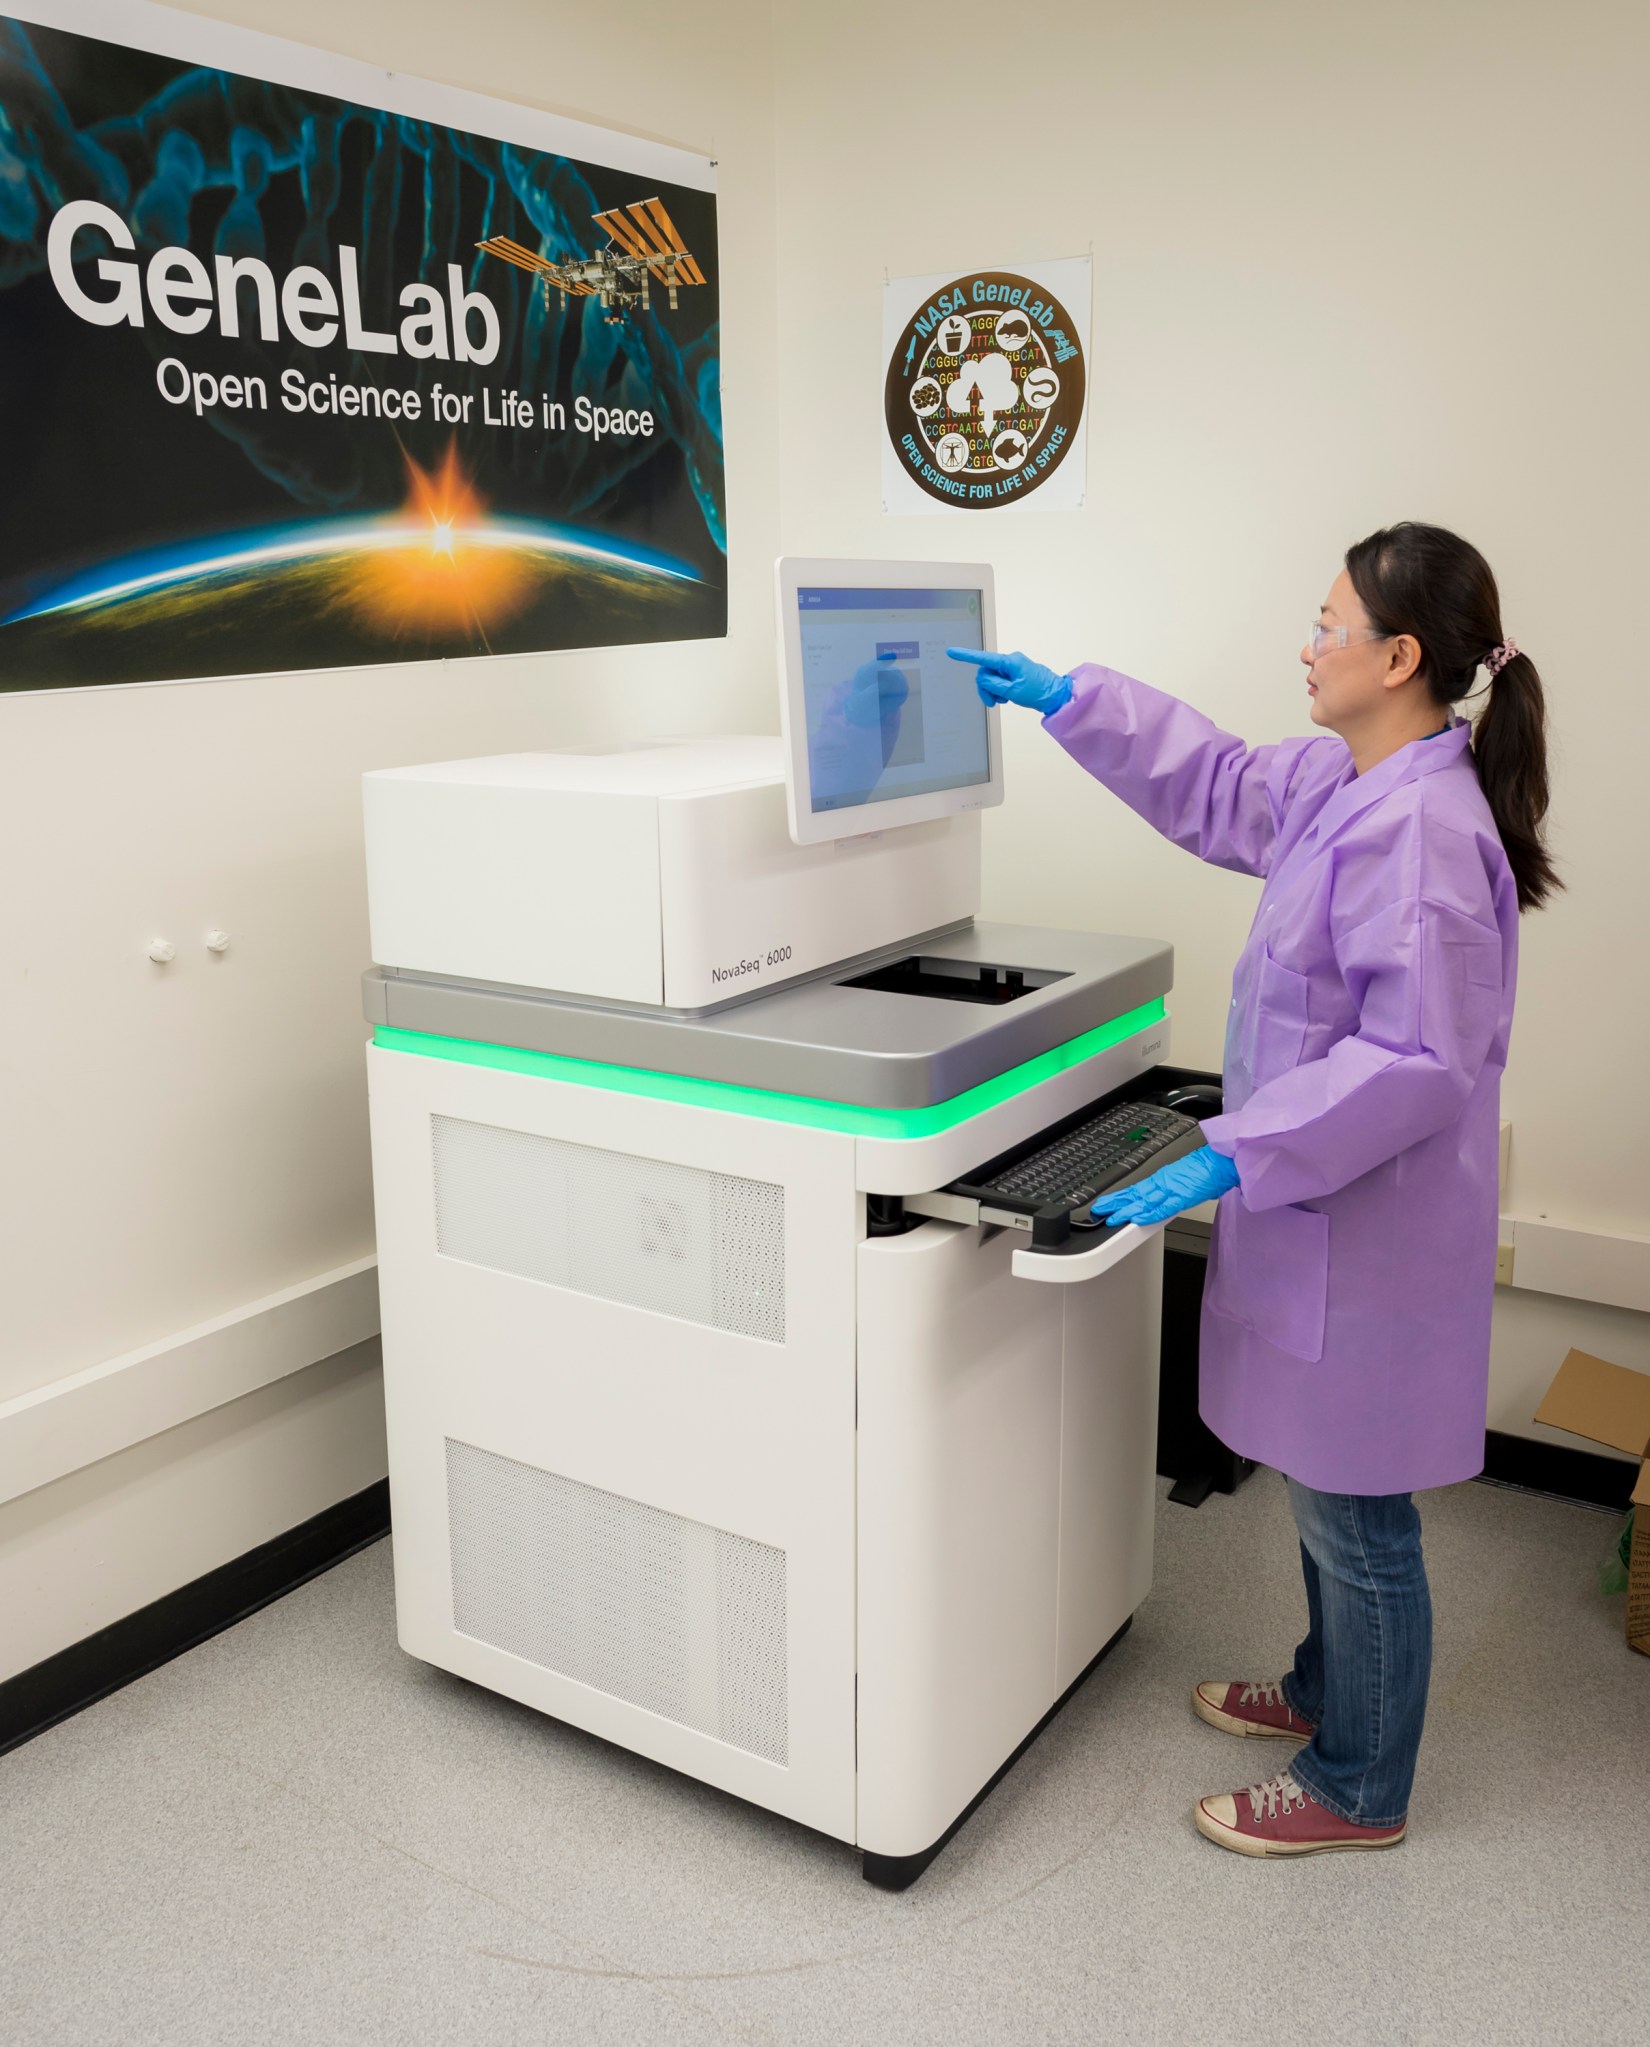 A woman stands at a machine and points to a monitor, a banner for GeneLab is on the wall in the background.